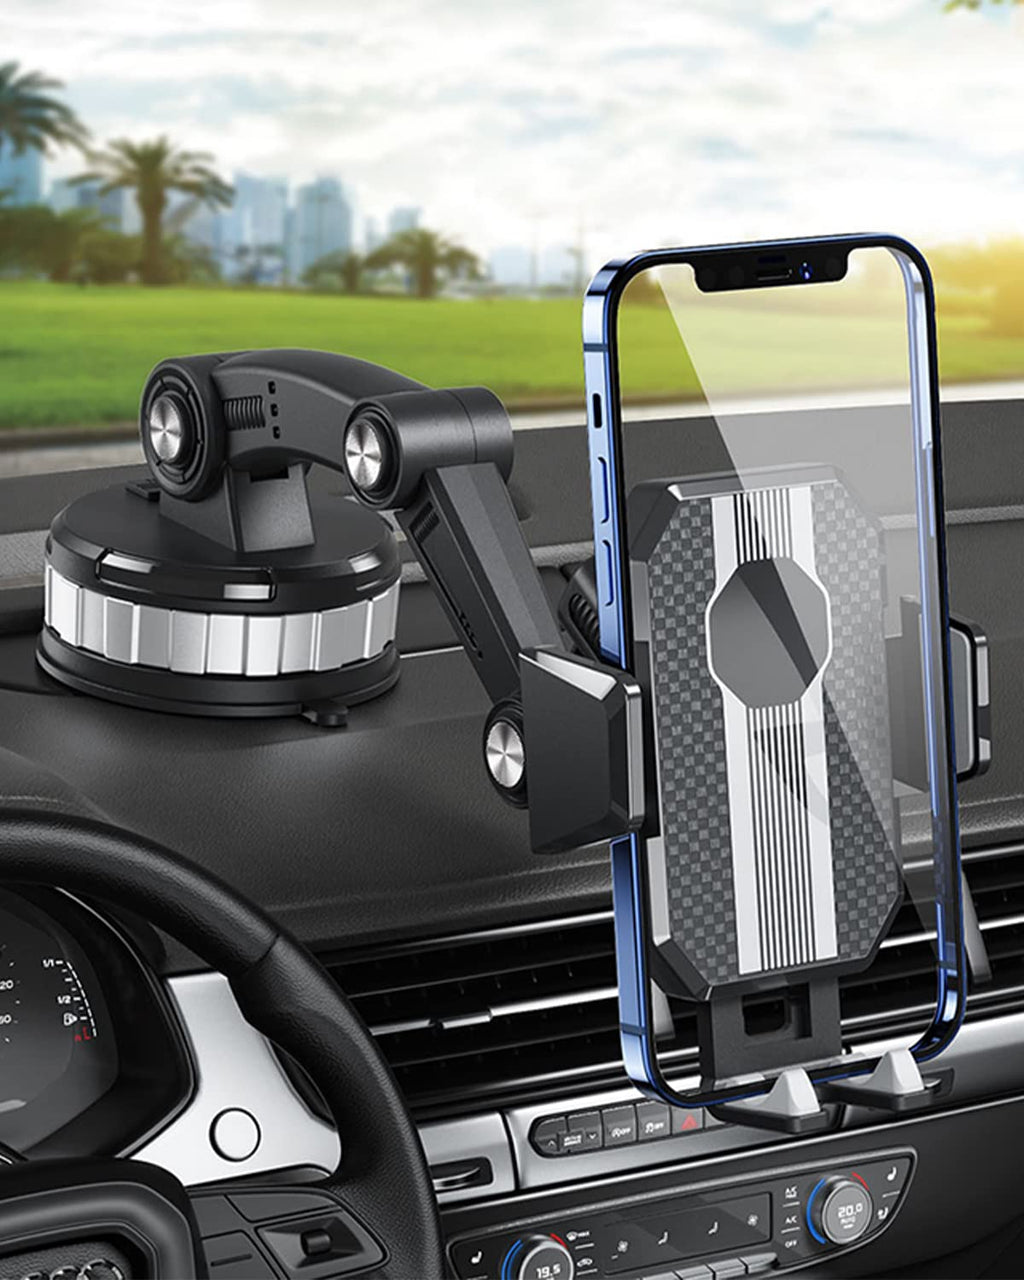  [AUSTRALIA] - 2023 New Sucker Car Phone Holder - Universal Dashboard Windshield Window Cell Phone Mount Suction Cup Phone Holder with Telescopic Arm Desk Stand Automobile Mounts Fit for iPhone Smartphone Classic-Black